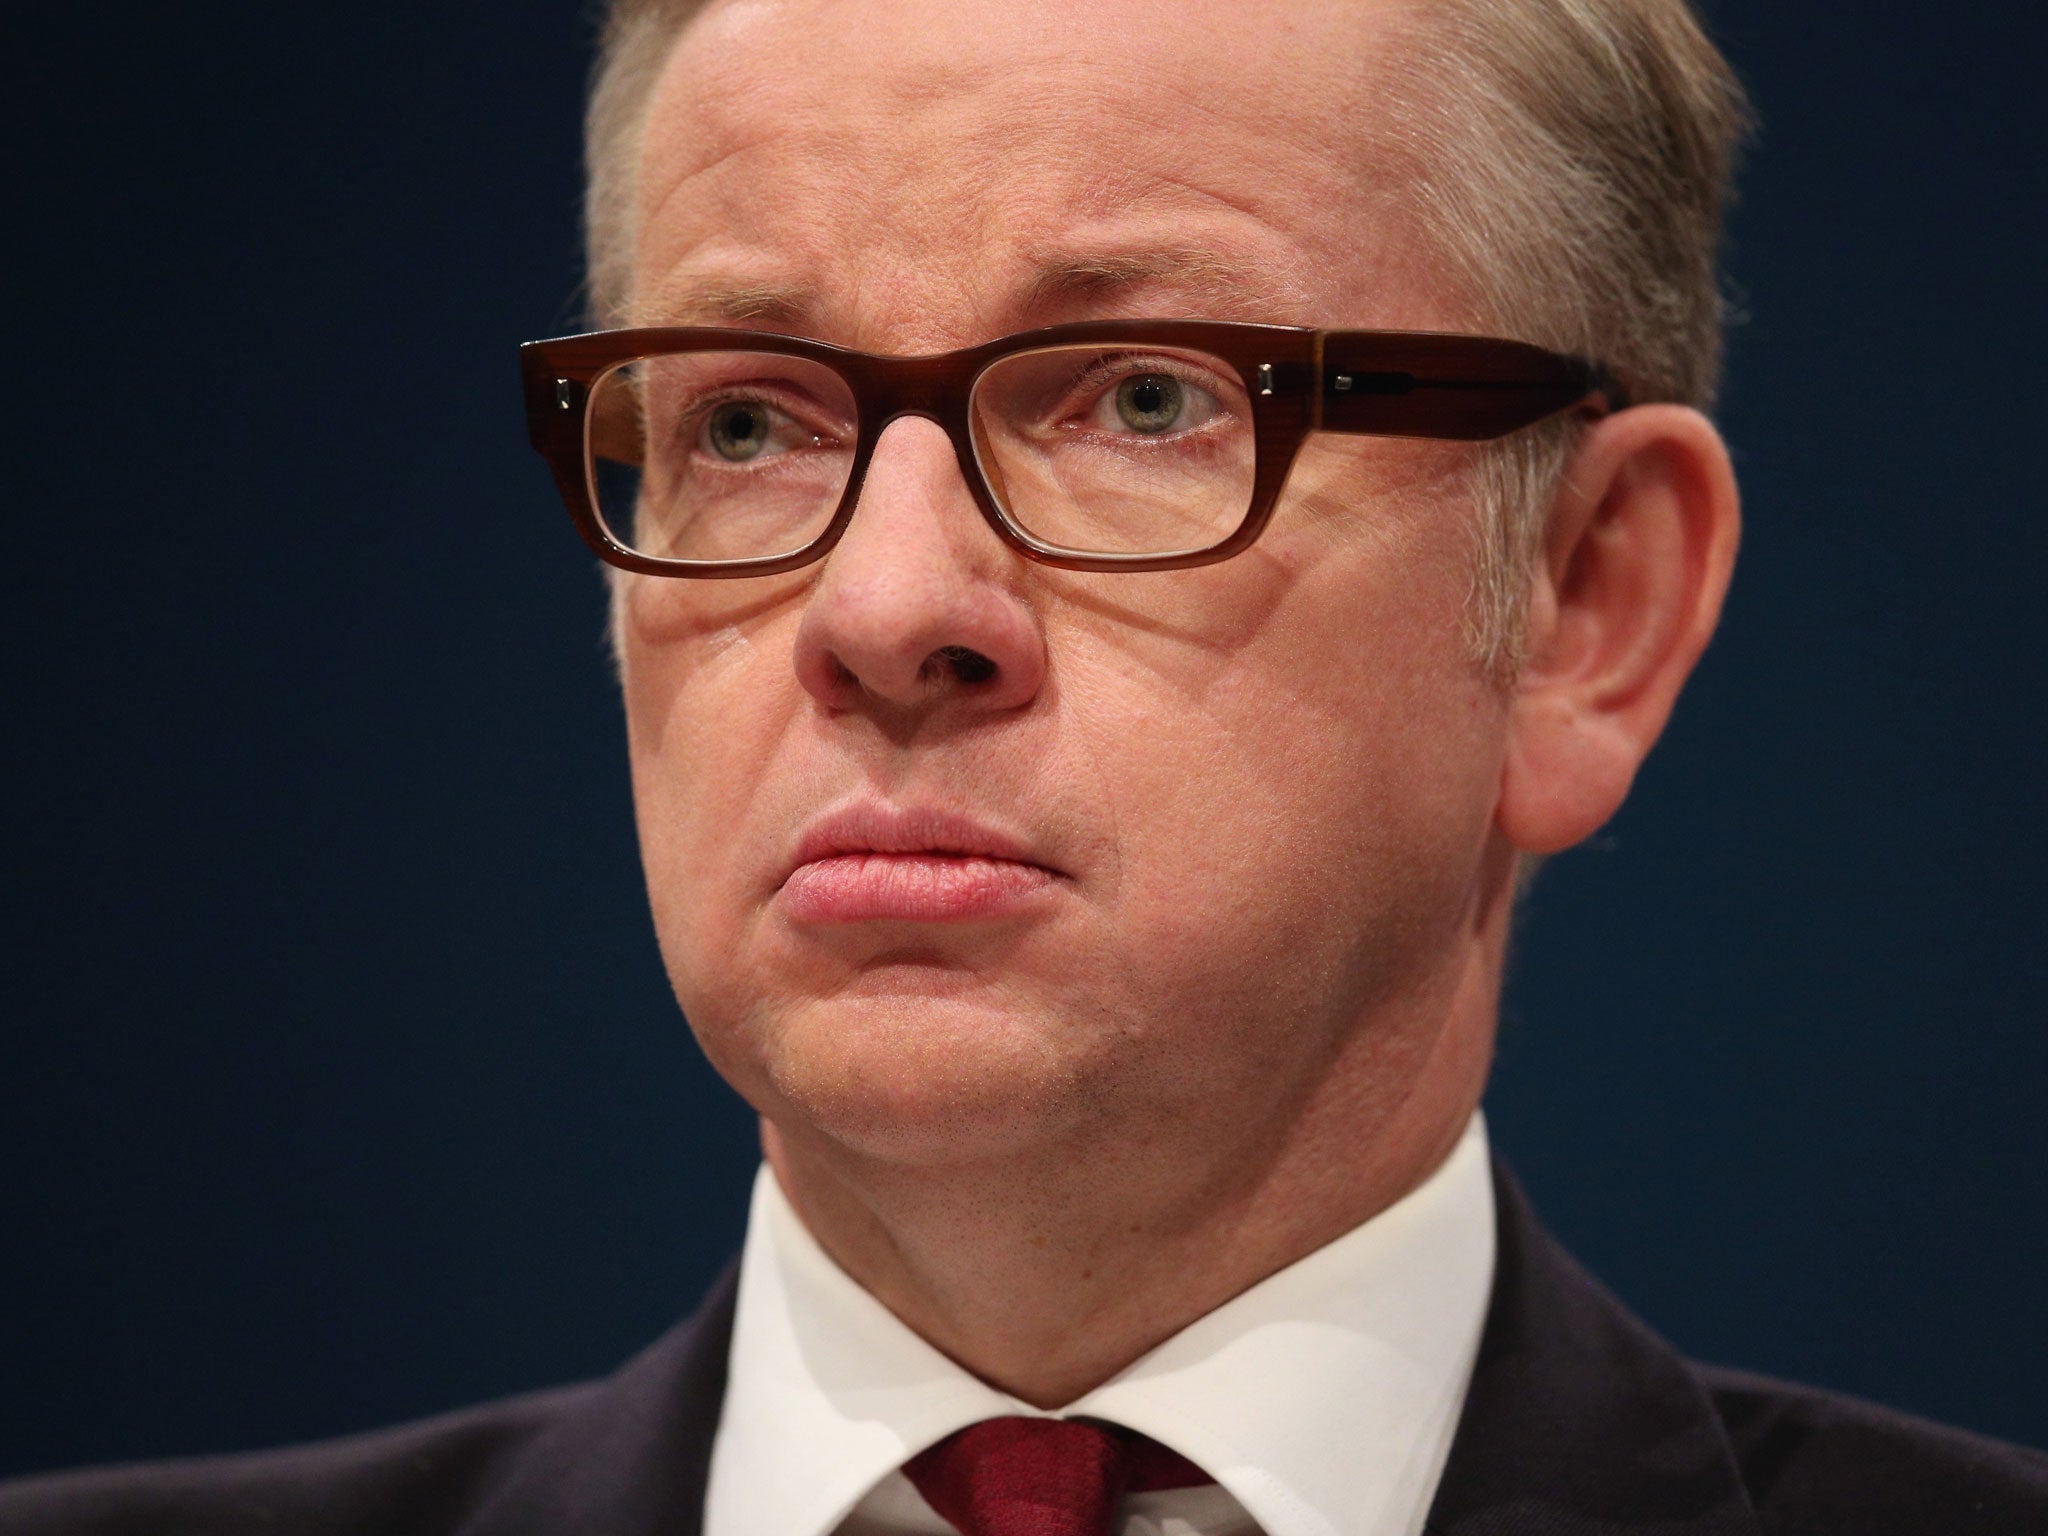 Education Secretary Michael Gove has led the the move to implement more unqualified teachers in schools